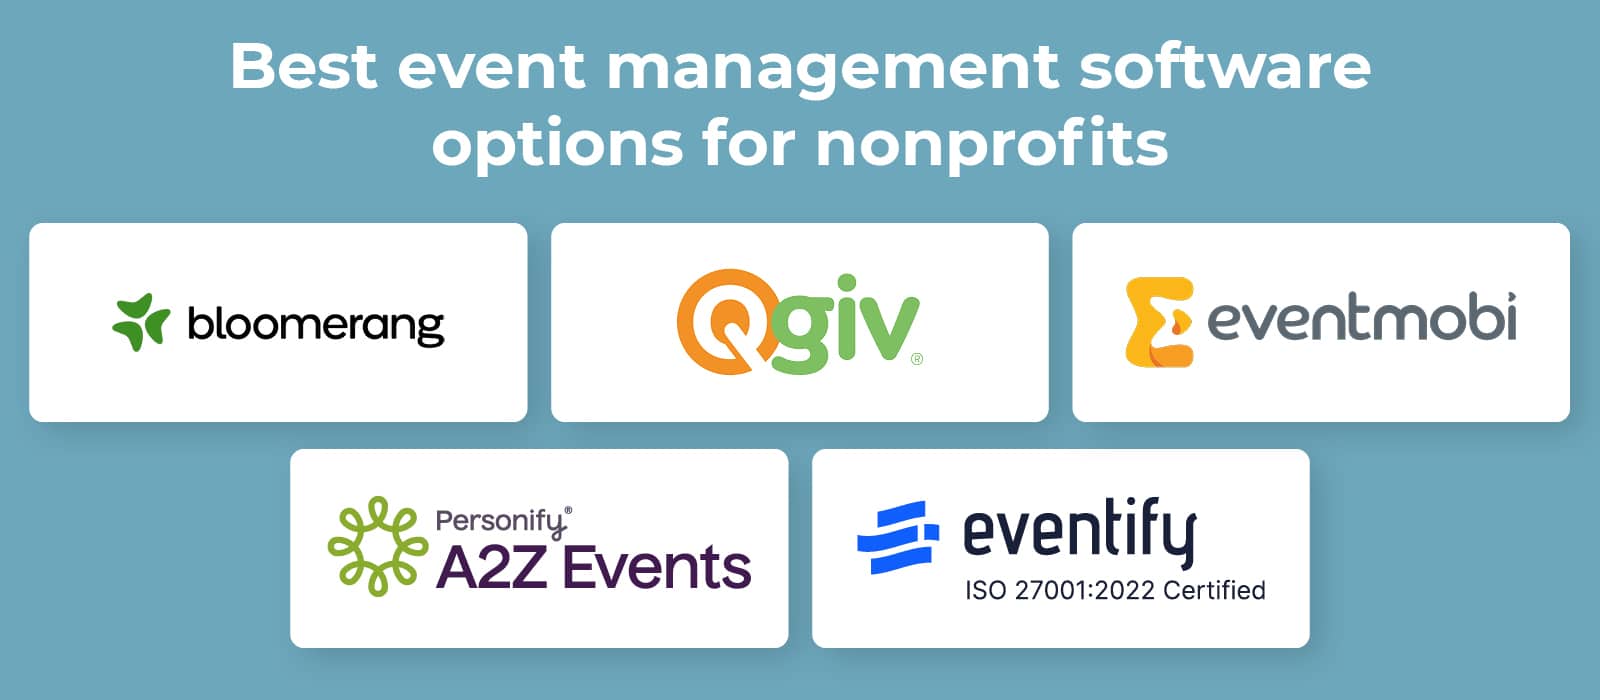 Logos for the best event management software for nonprofits, listed below